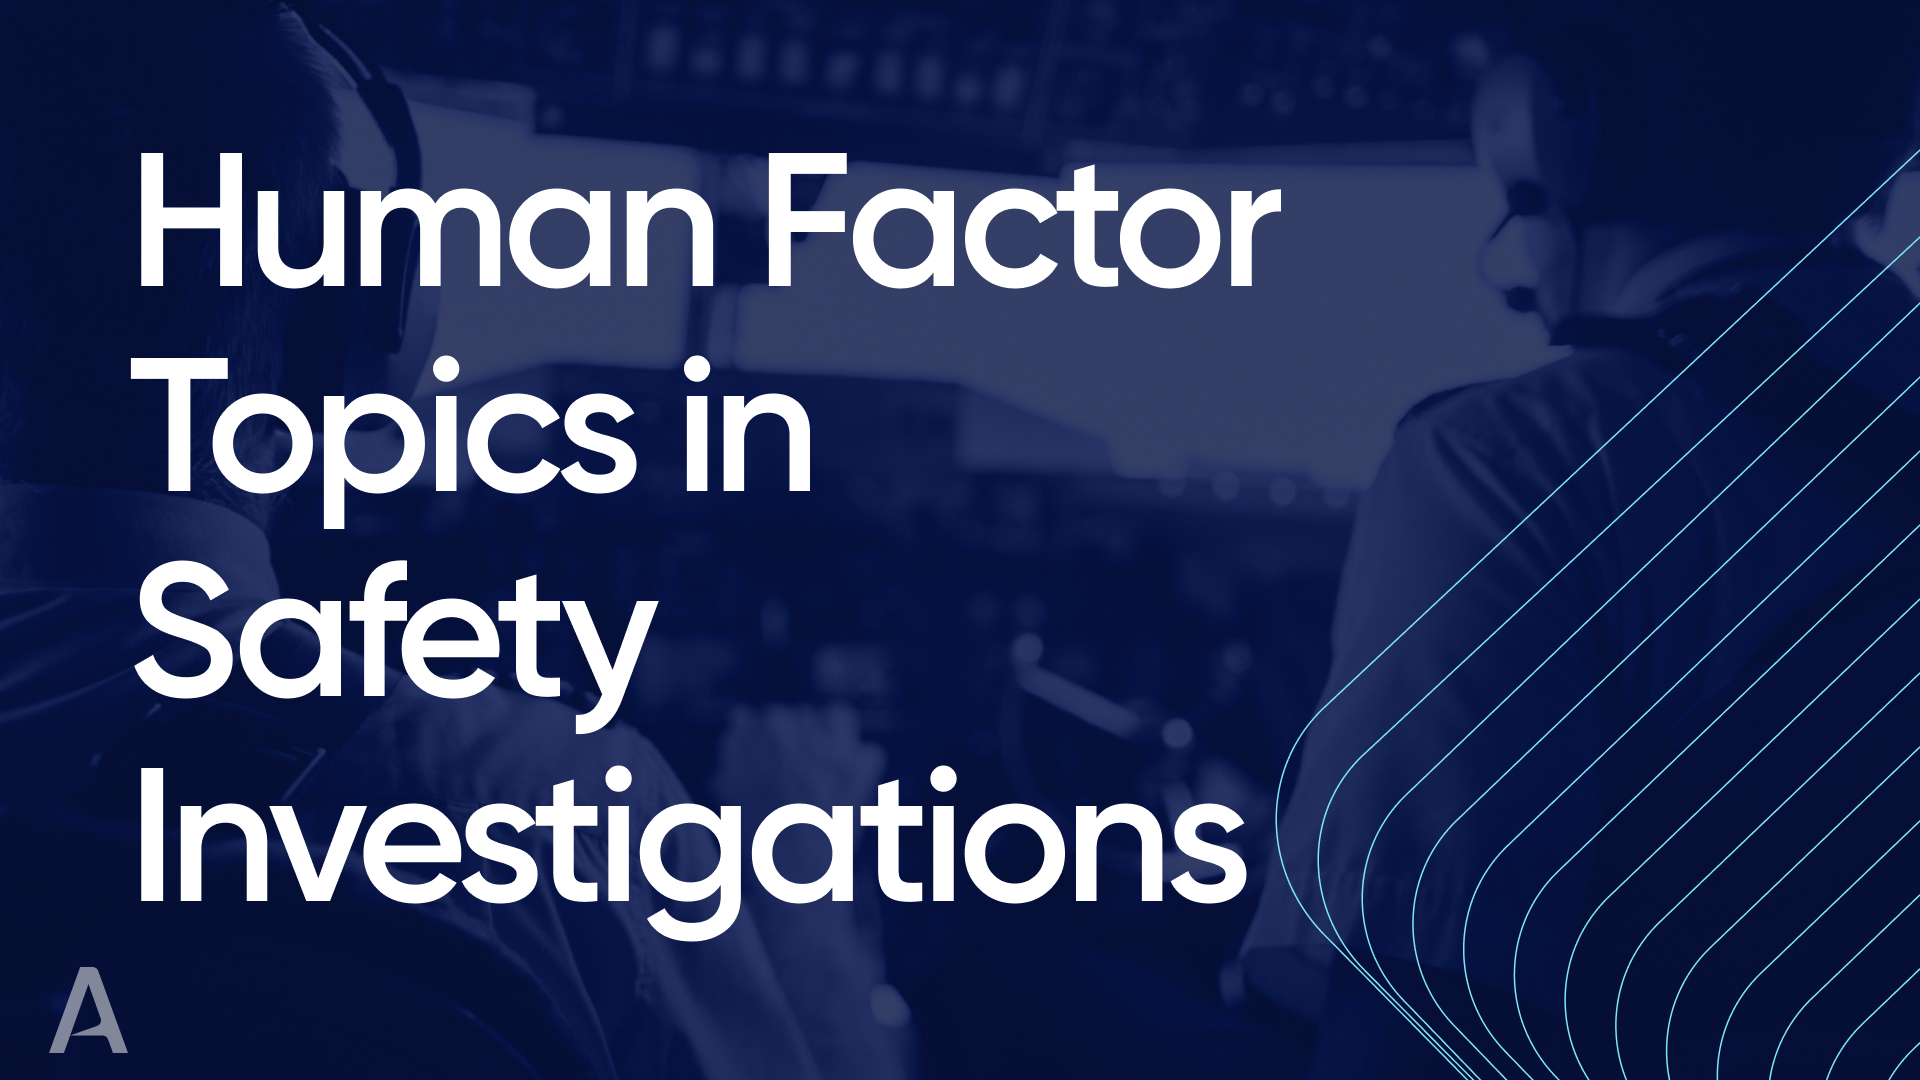 Human Factor Topics in Safety Investigations